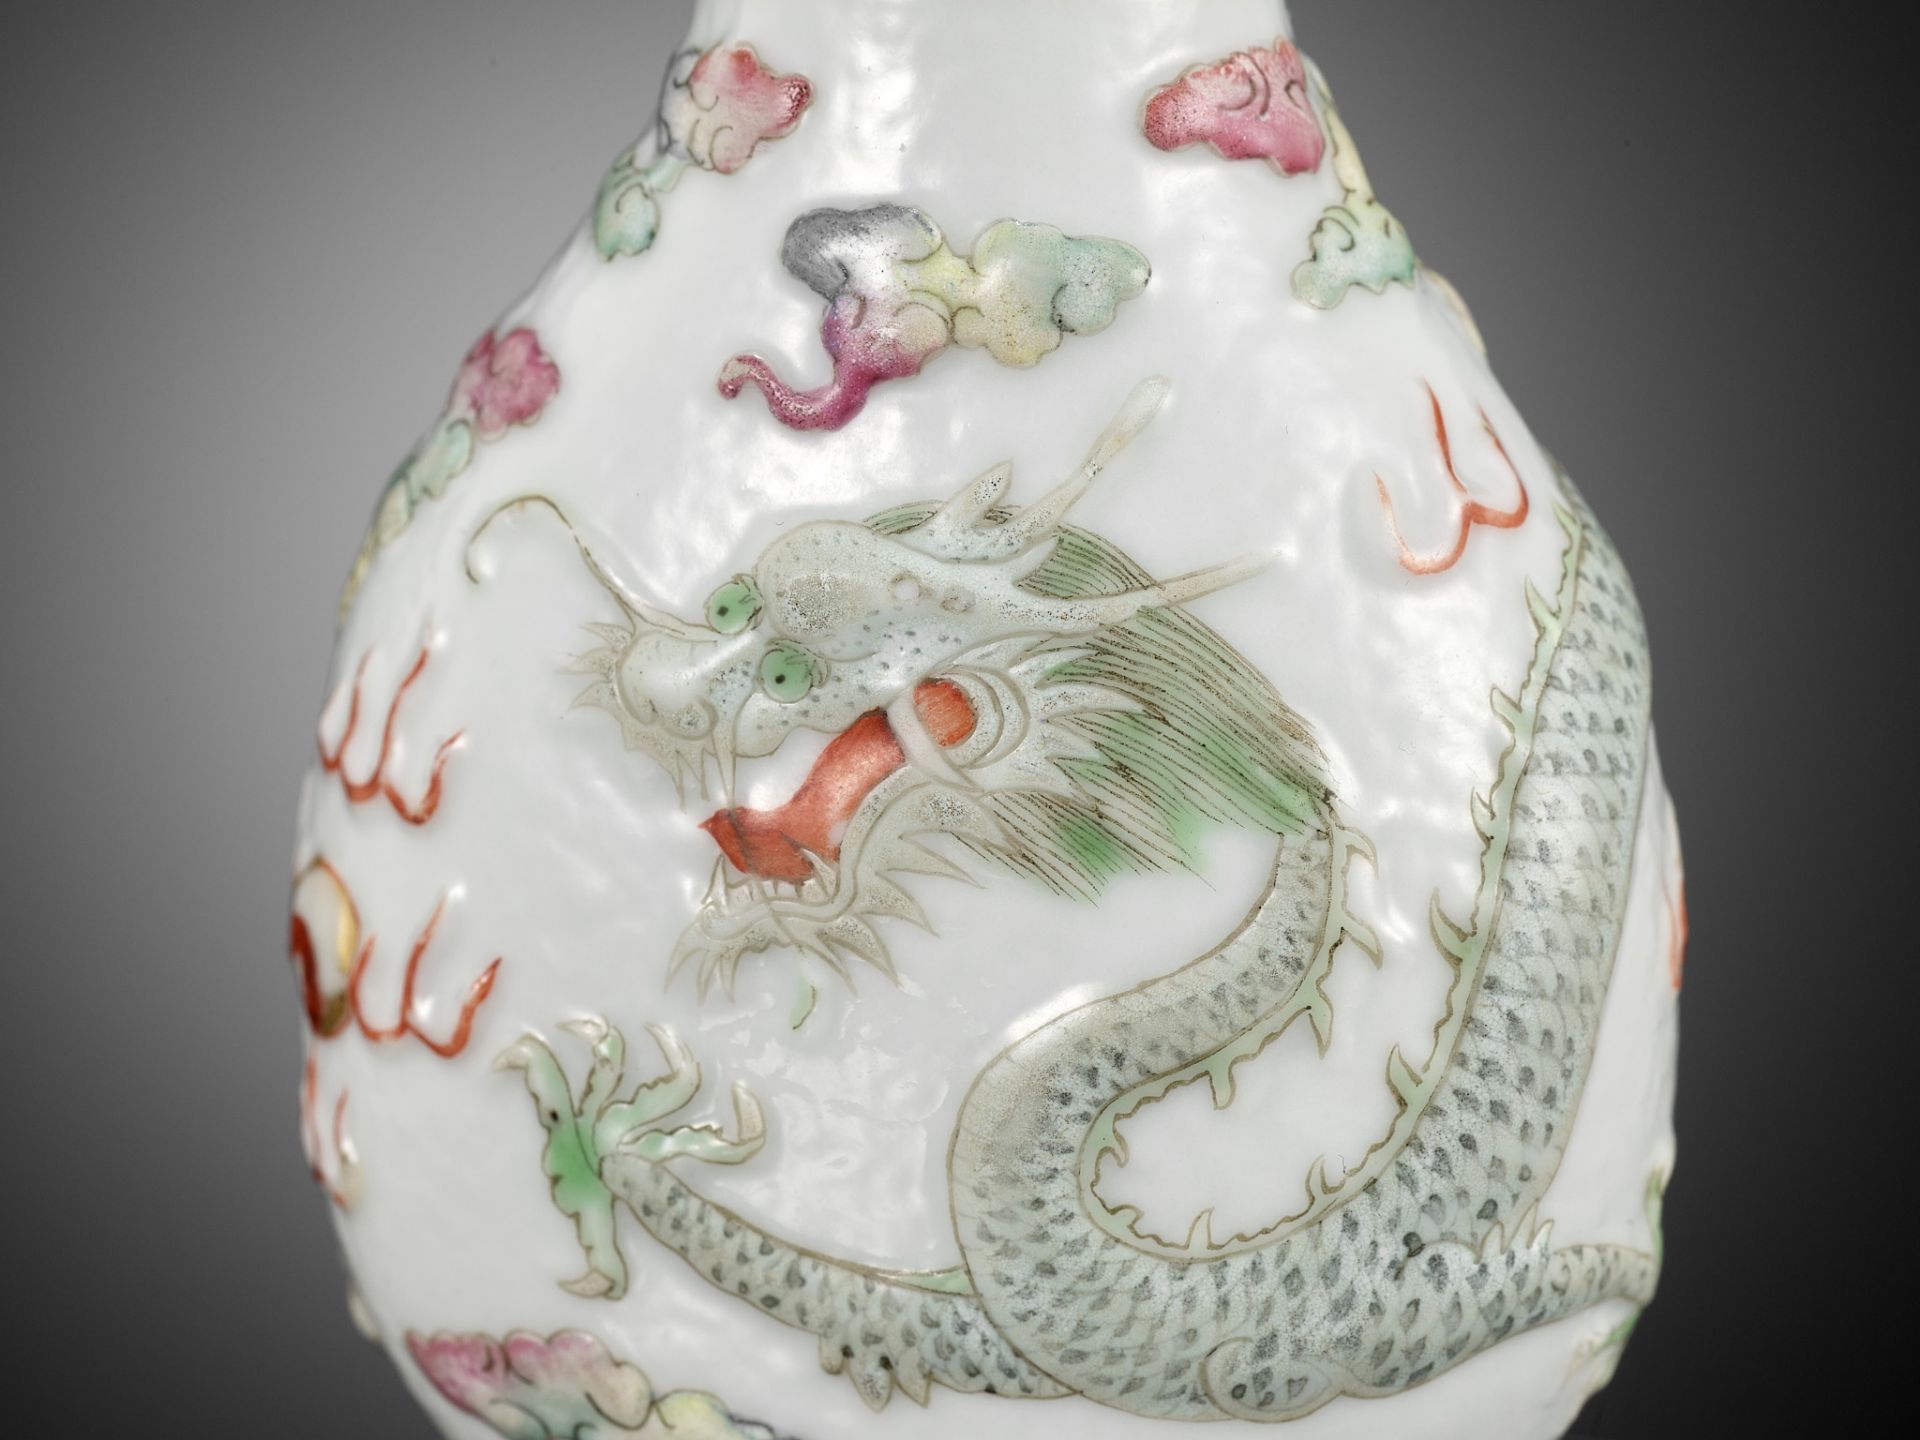 A MOLDED AND CARVED 'DRAGON' FAMILLE ROSE PORCELAIN SNUFF BOTTLE, SIGNED LIQUAN, CHINA, 1853-1864